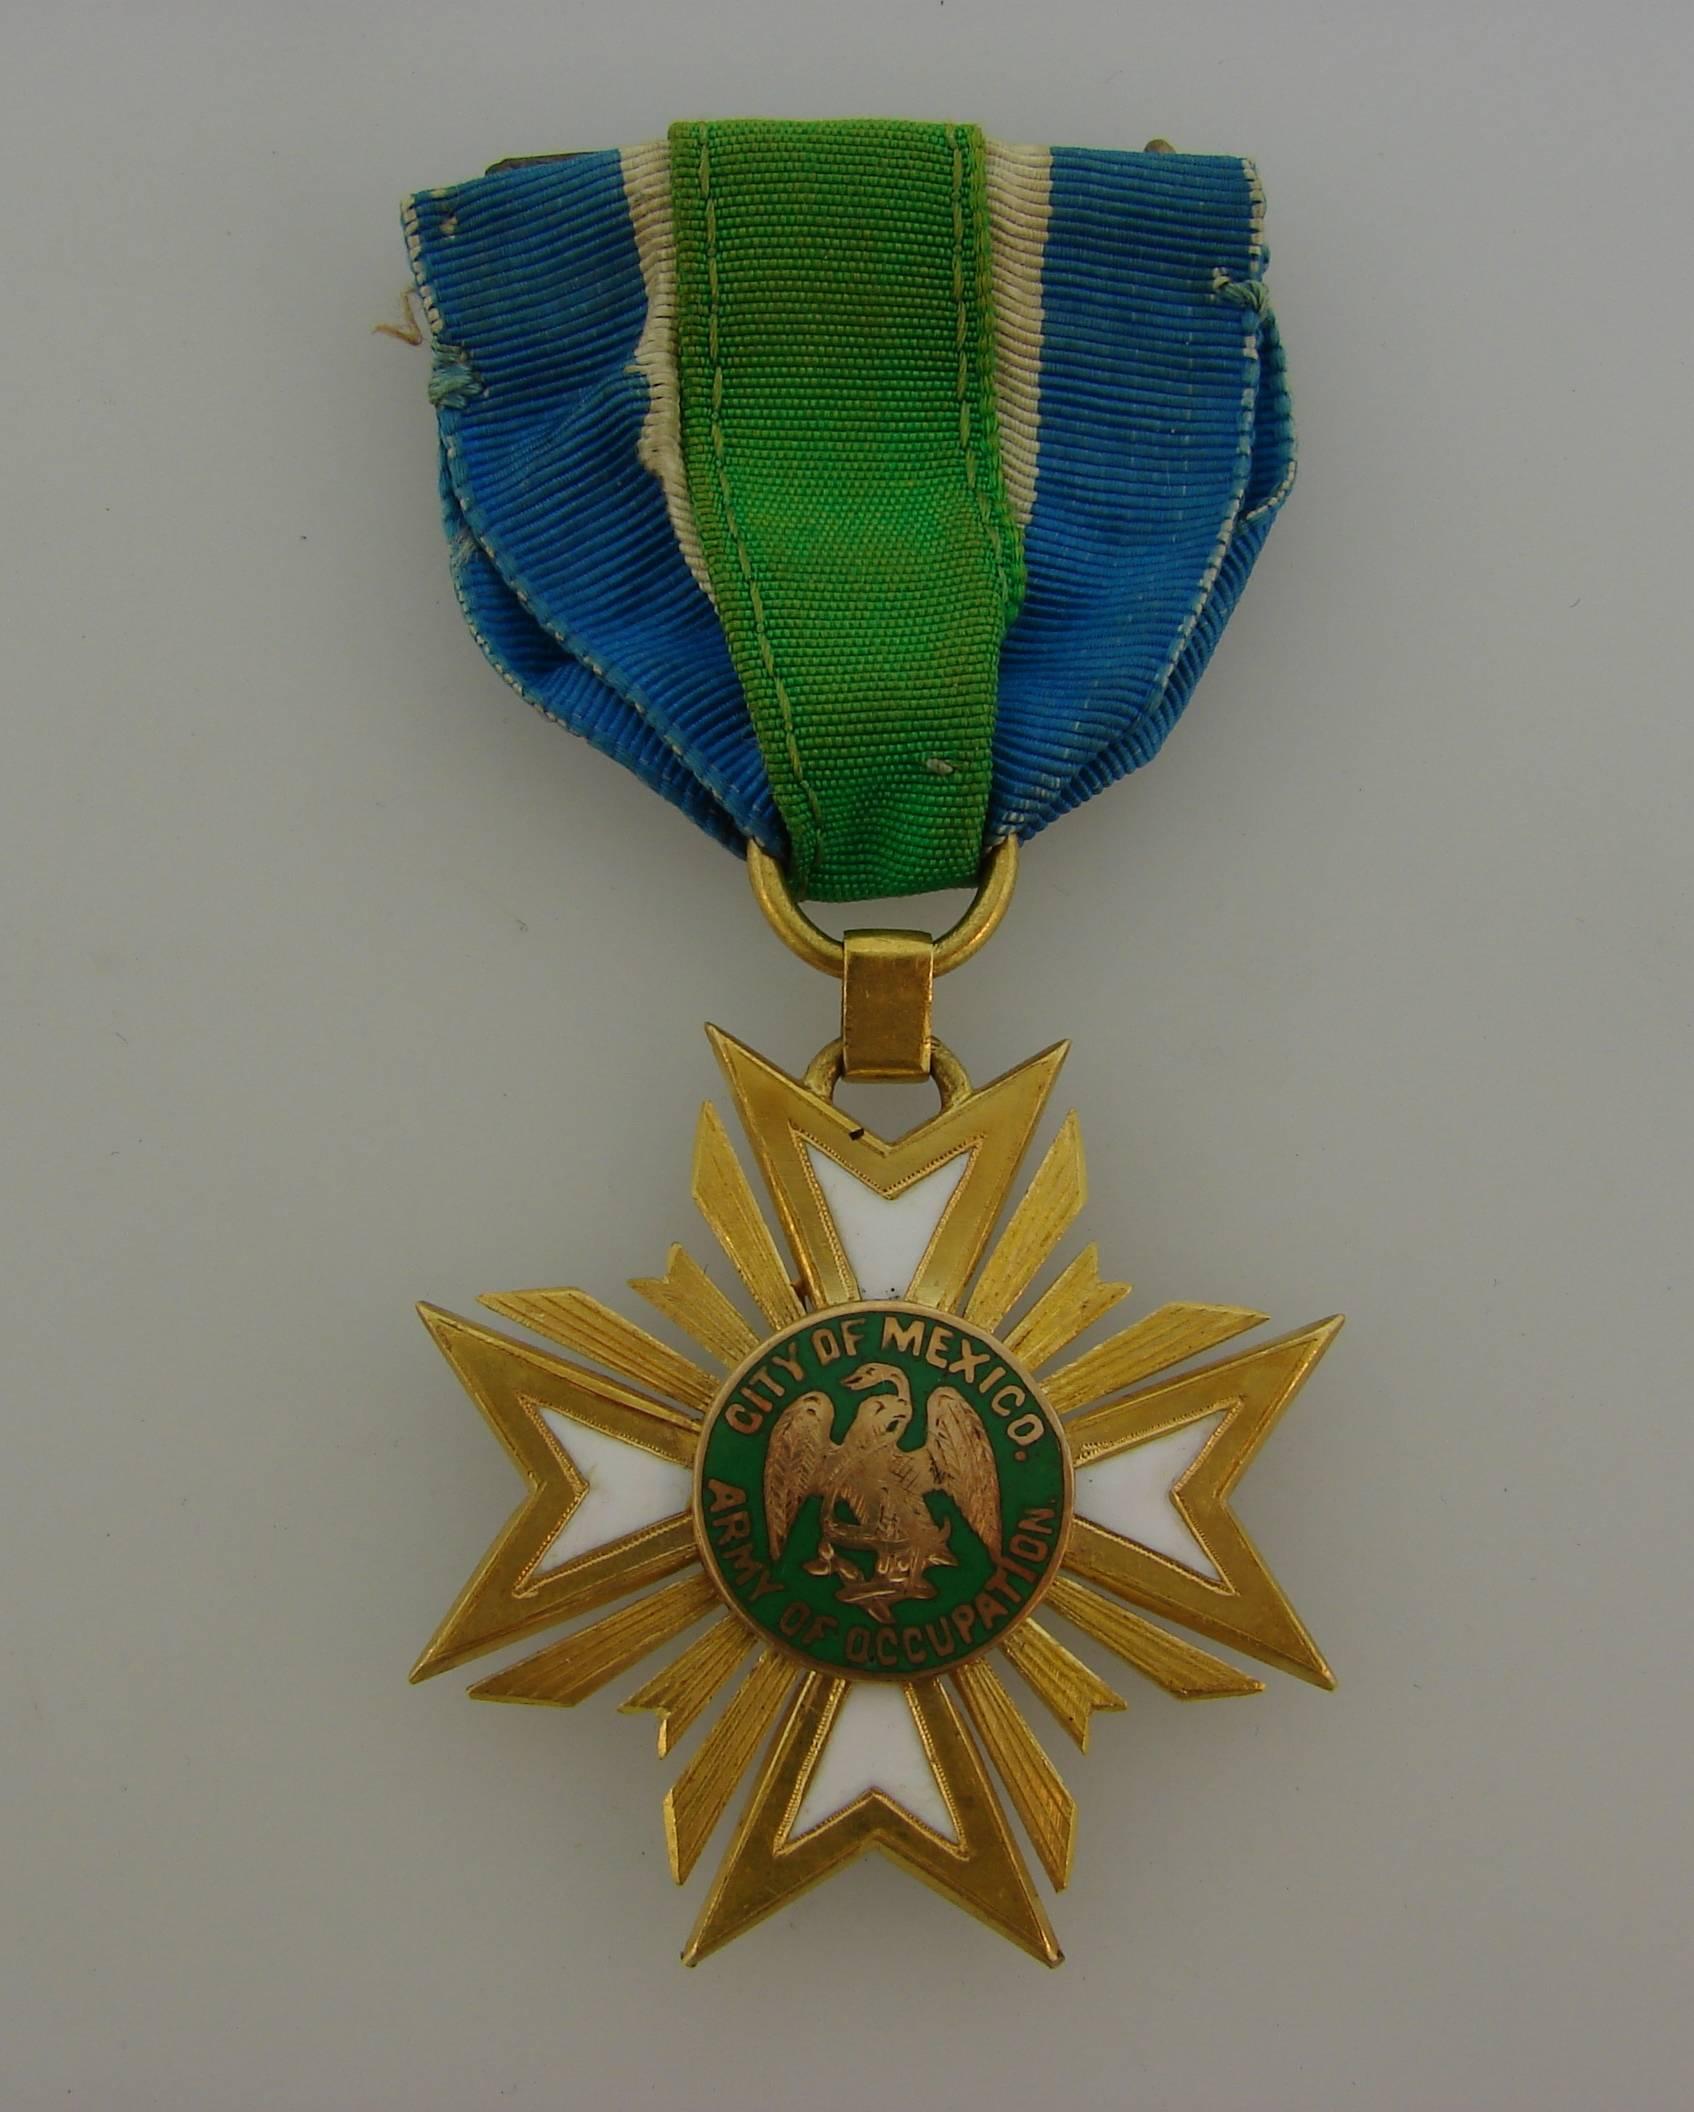 An antique historical insignia medal created by Tiffany & Co. in the second half of the 19th century for the Aztec Club. The Aztec Club was founded in 1847 by officers who were in active duty in the Mexican War. The Aztec Club is the second oldest